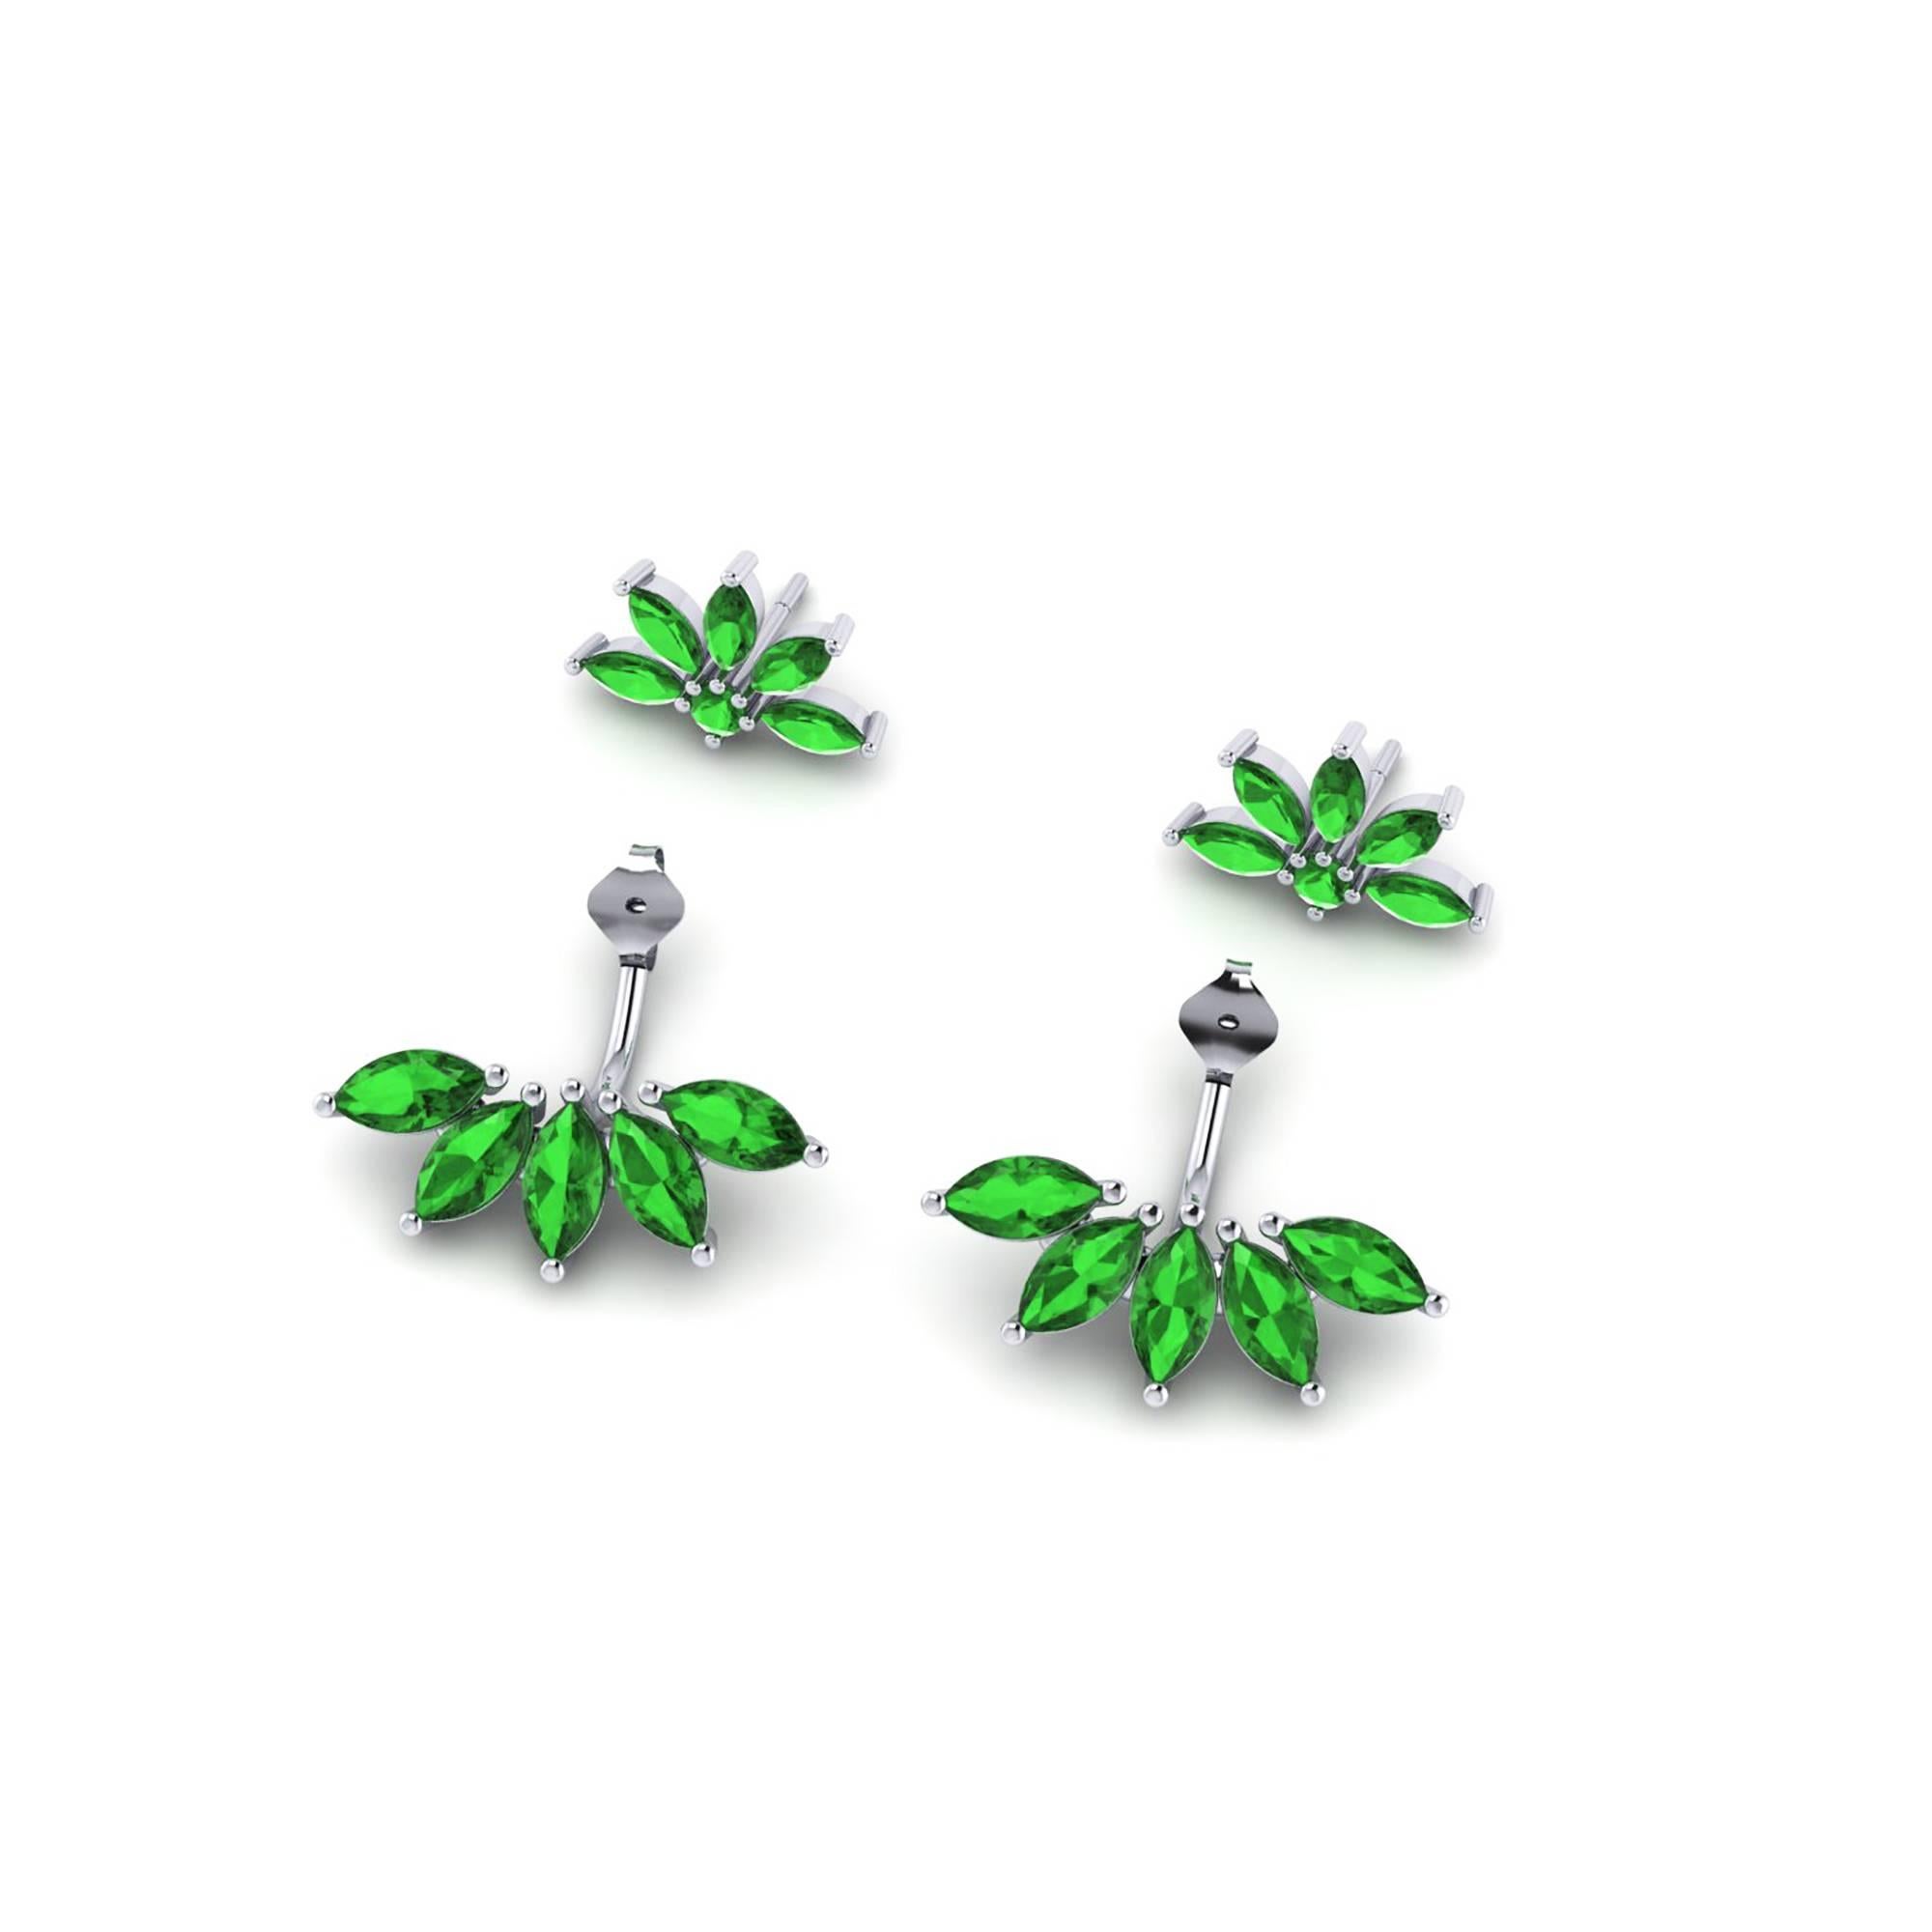 Ferrucci 3.90 carat Tsavorite marquise shape set in 18k white gold earrings hand made in NY by Italian master jeweler and designer Francesco Ferrucci.
Hand selected Tsavorite gems and new design to conceive a fresh, deep feeling of calm, clean